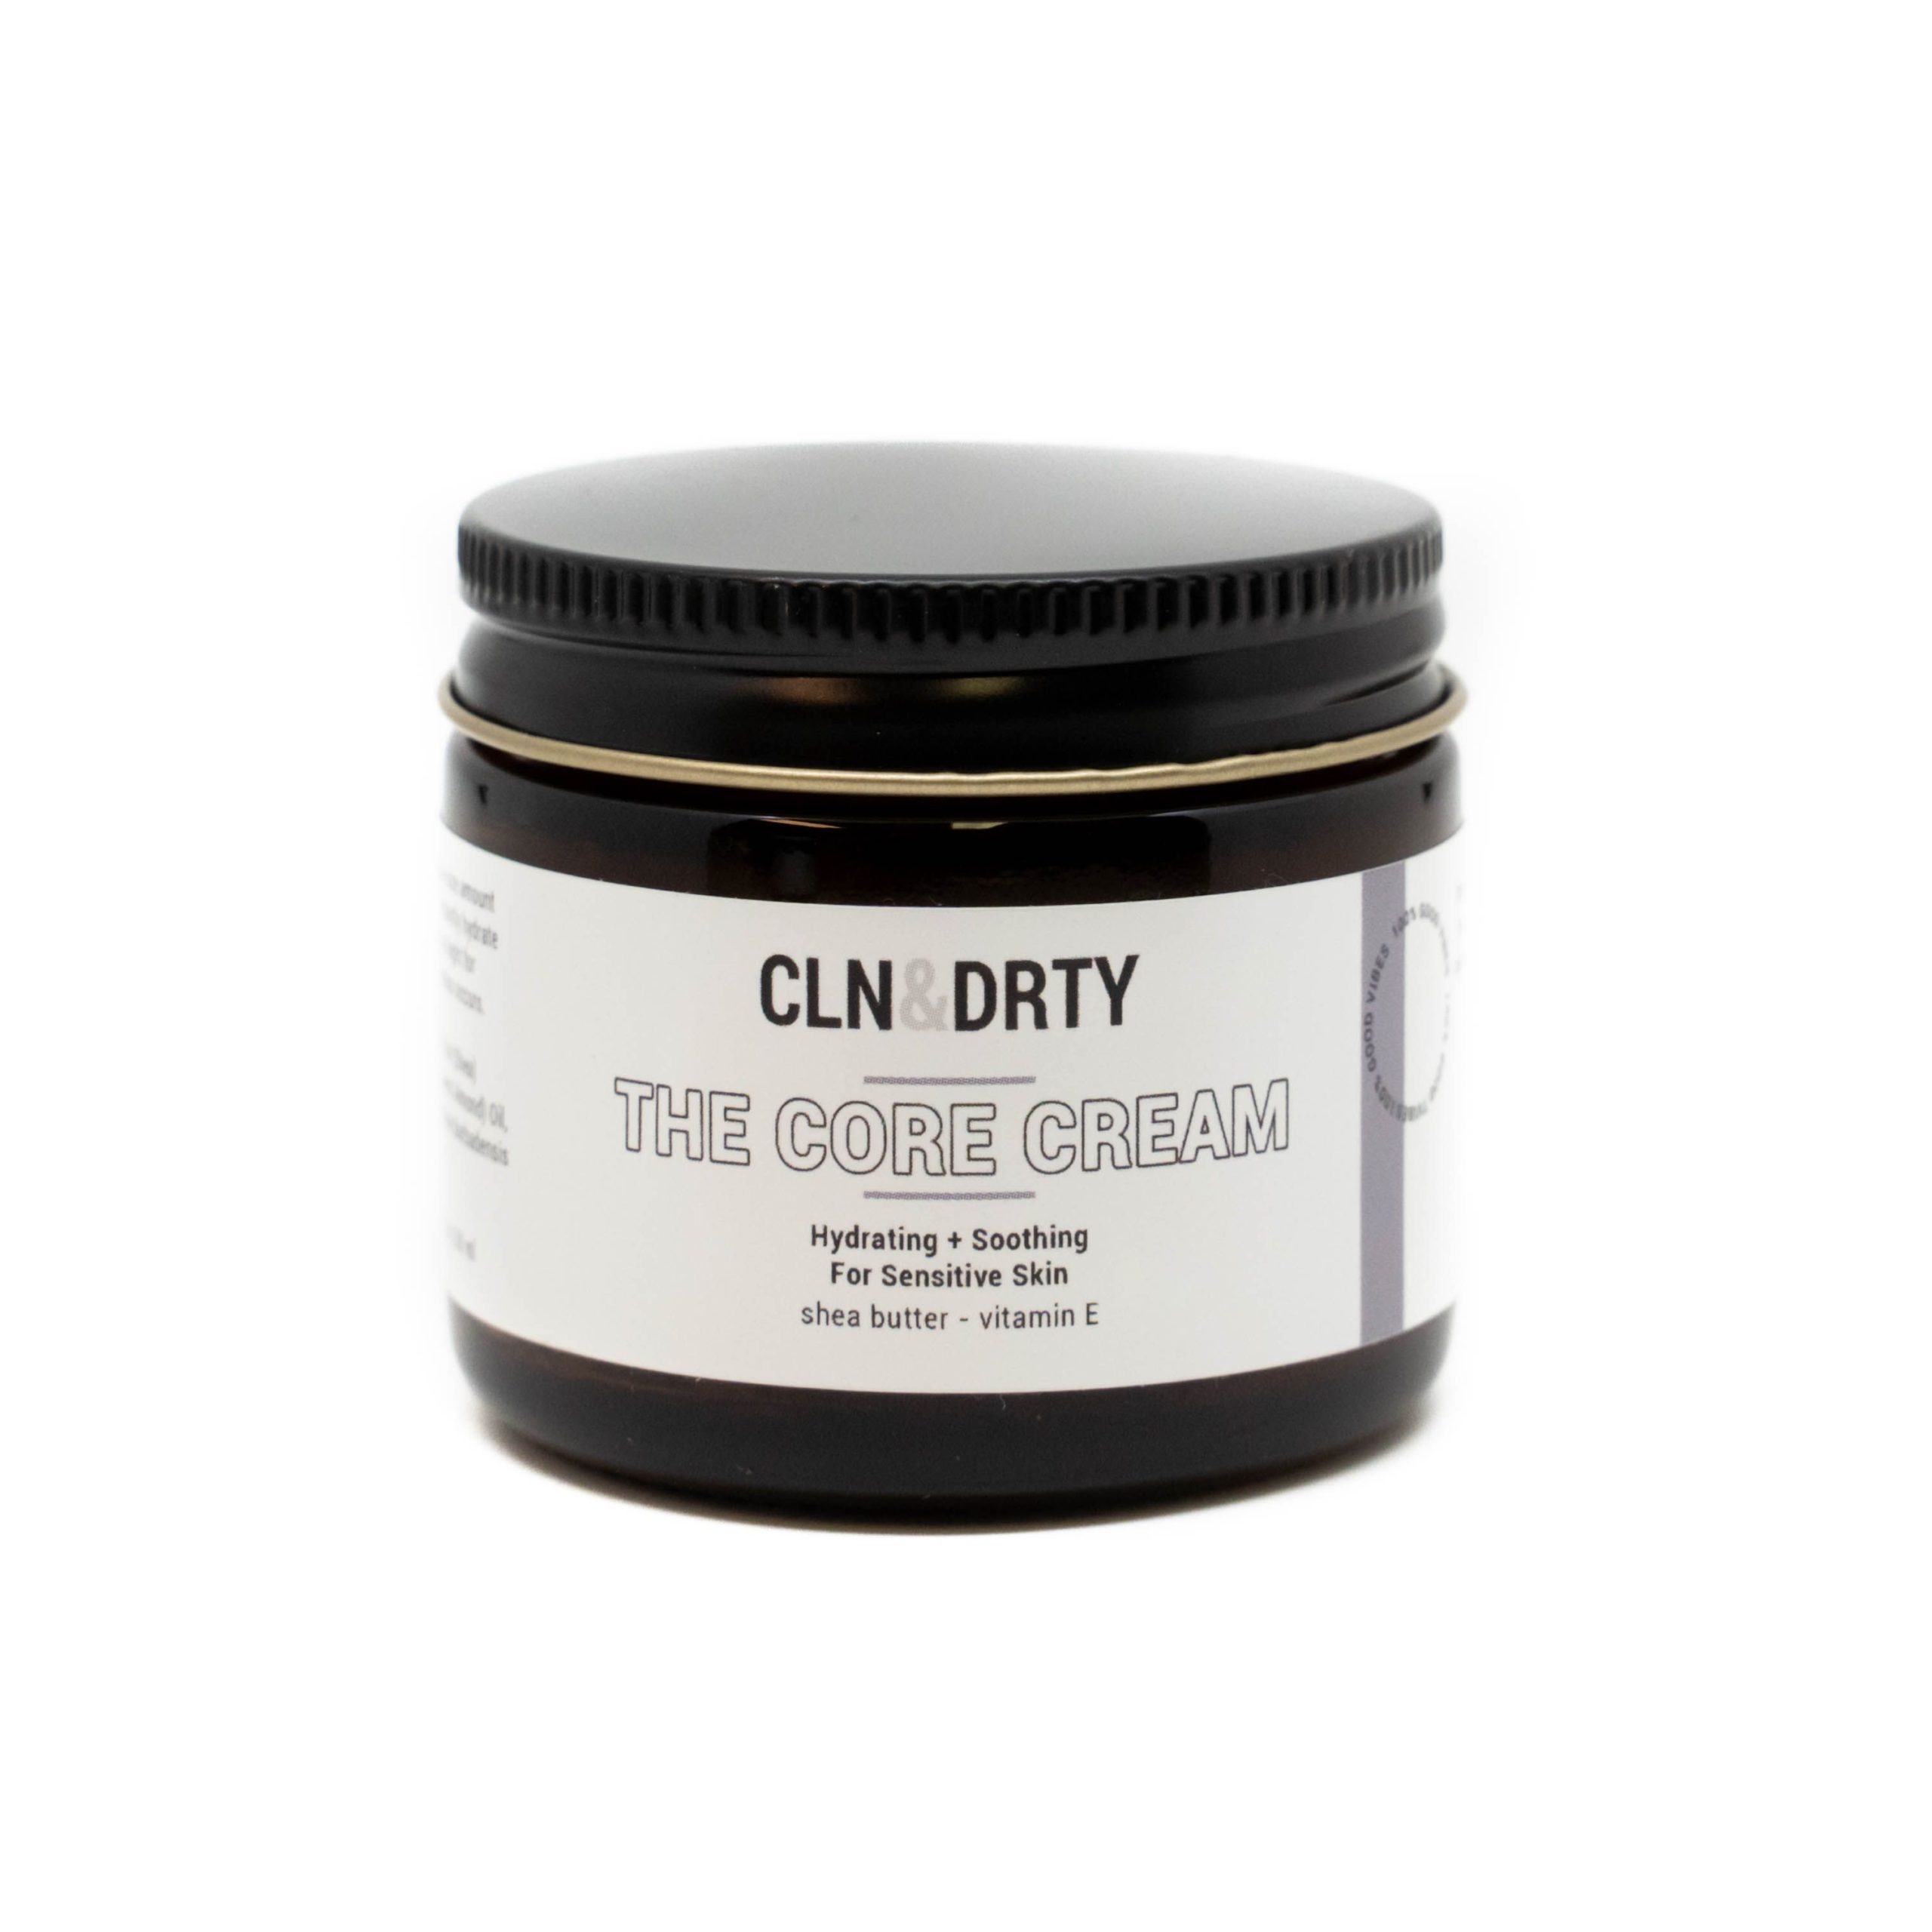  CLn® Facial Moisturizer - Soothes & Calms Skin, Helps Reduce  Appearance of Redness, Locks in Moisture without Clogging Pores,  Dermatologist & Clinically Tested, 3.4 oz. : Beauty & Personal Care